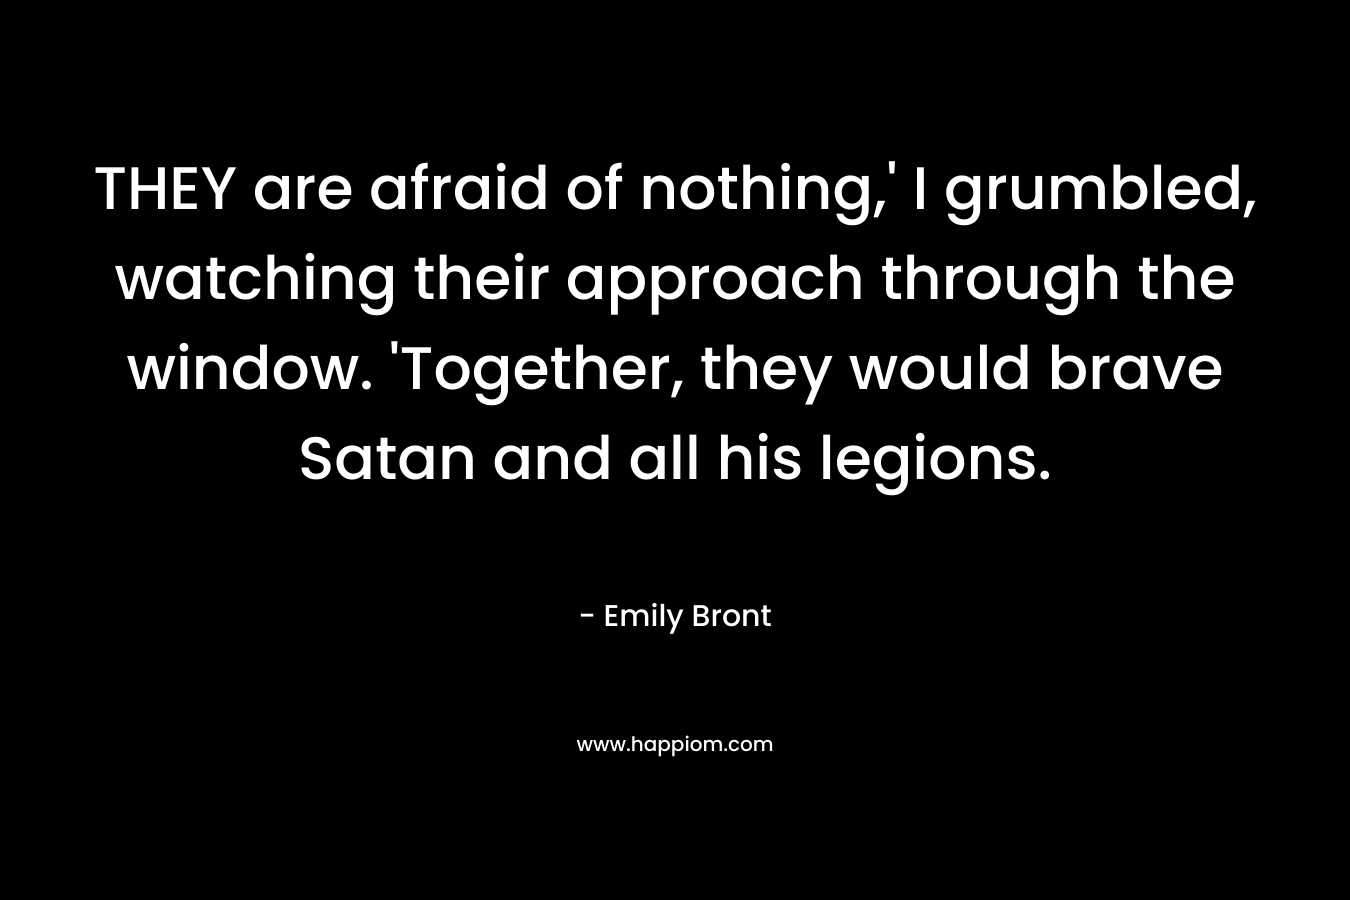 THEY are afraid of nothing,’ I grumbled, watching their approach through the window. ‘Together, they would brave Satan and all his legions. – Emily Bront